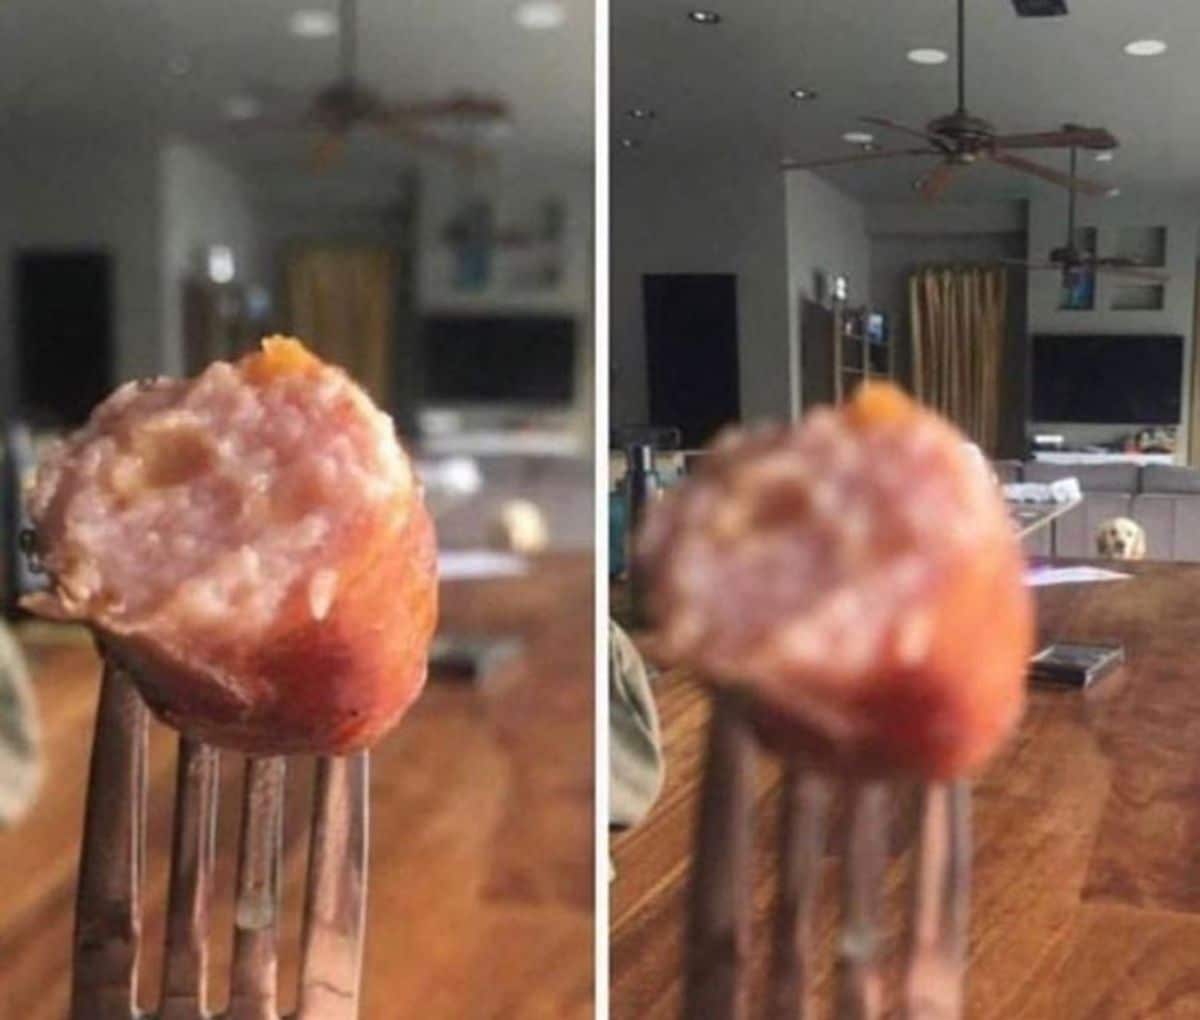 2 photos of a sausage being held up in a fork with a white dog staring at it from further away